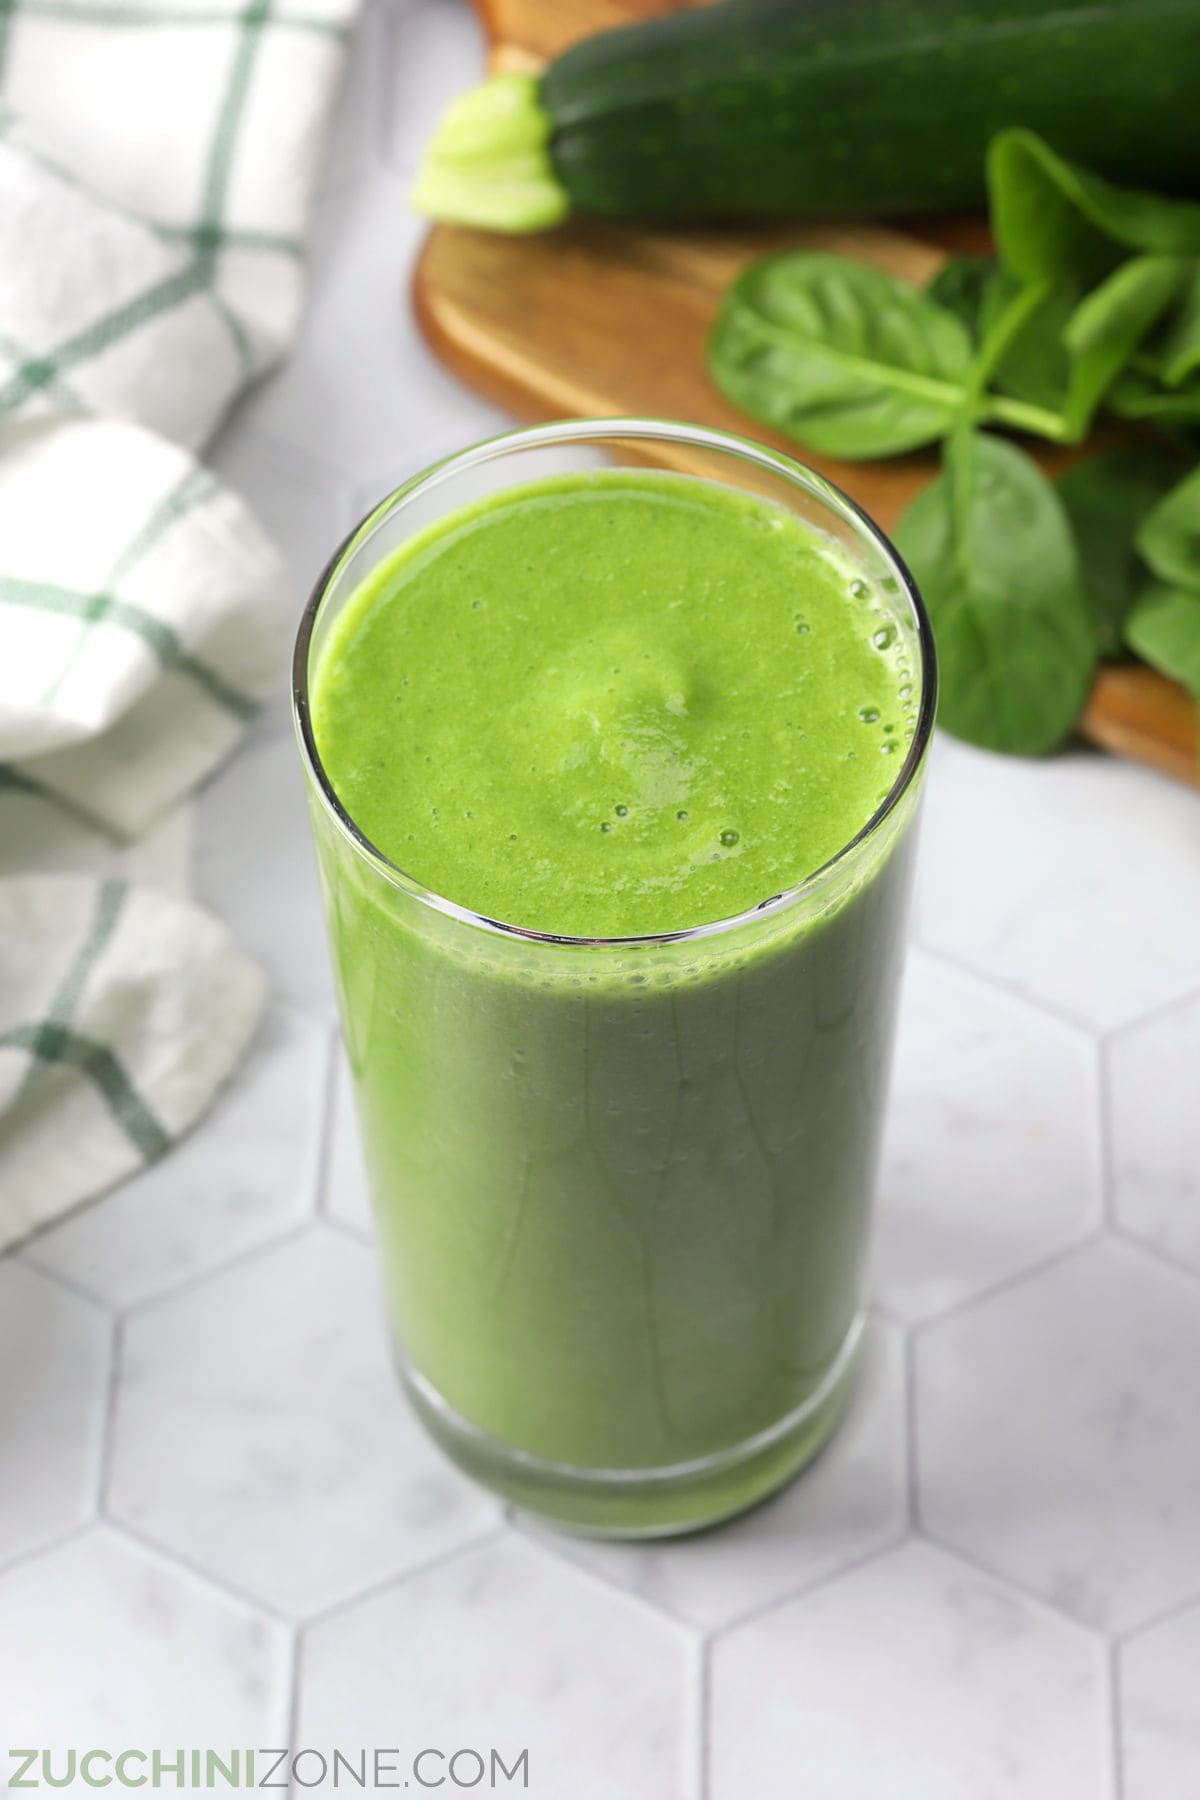 A tall glass filled with green apple smoothie.